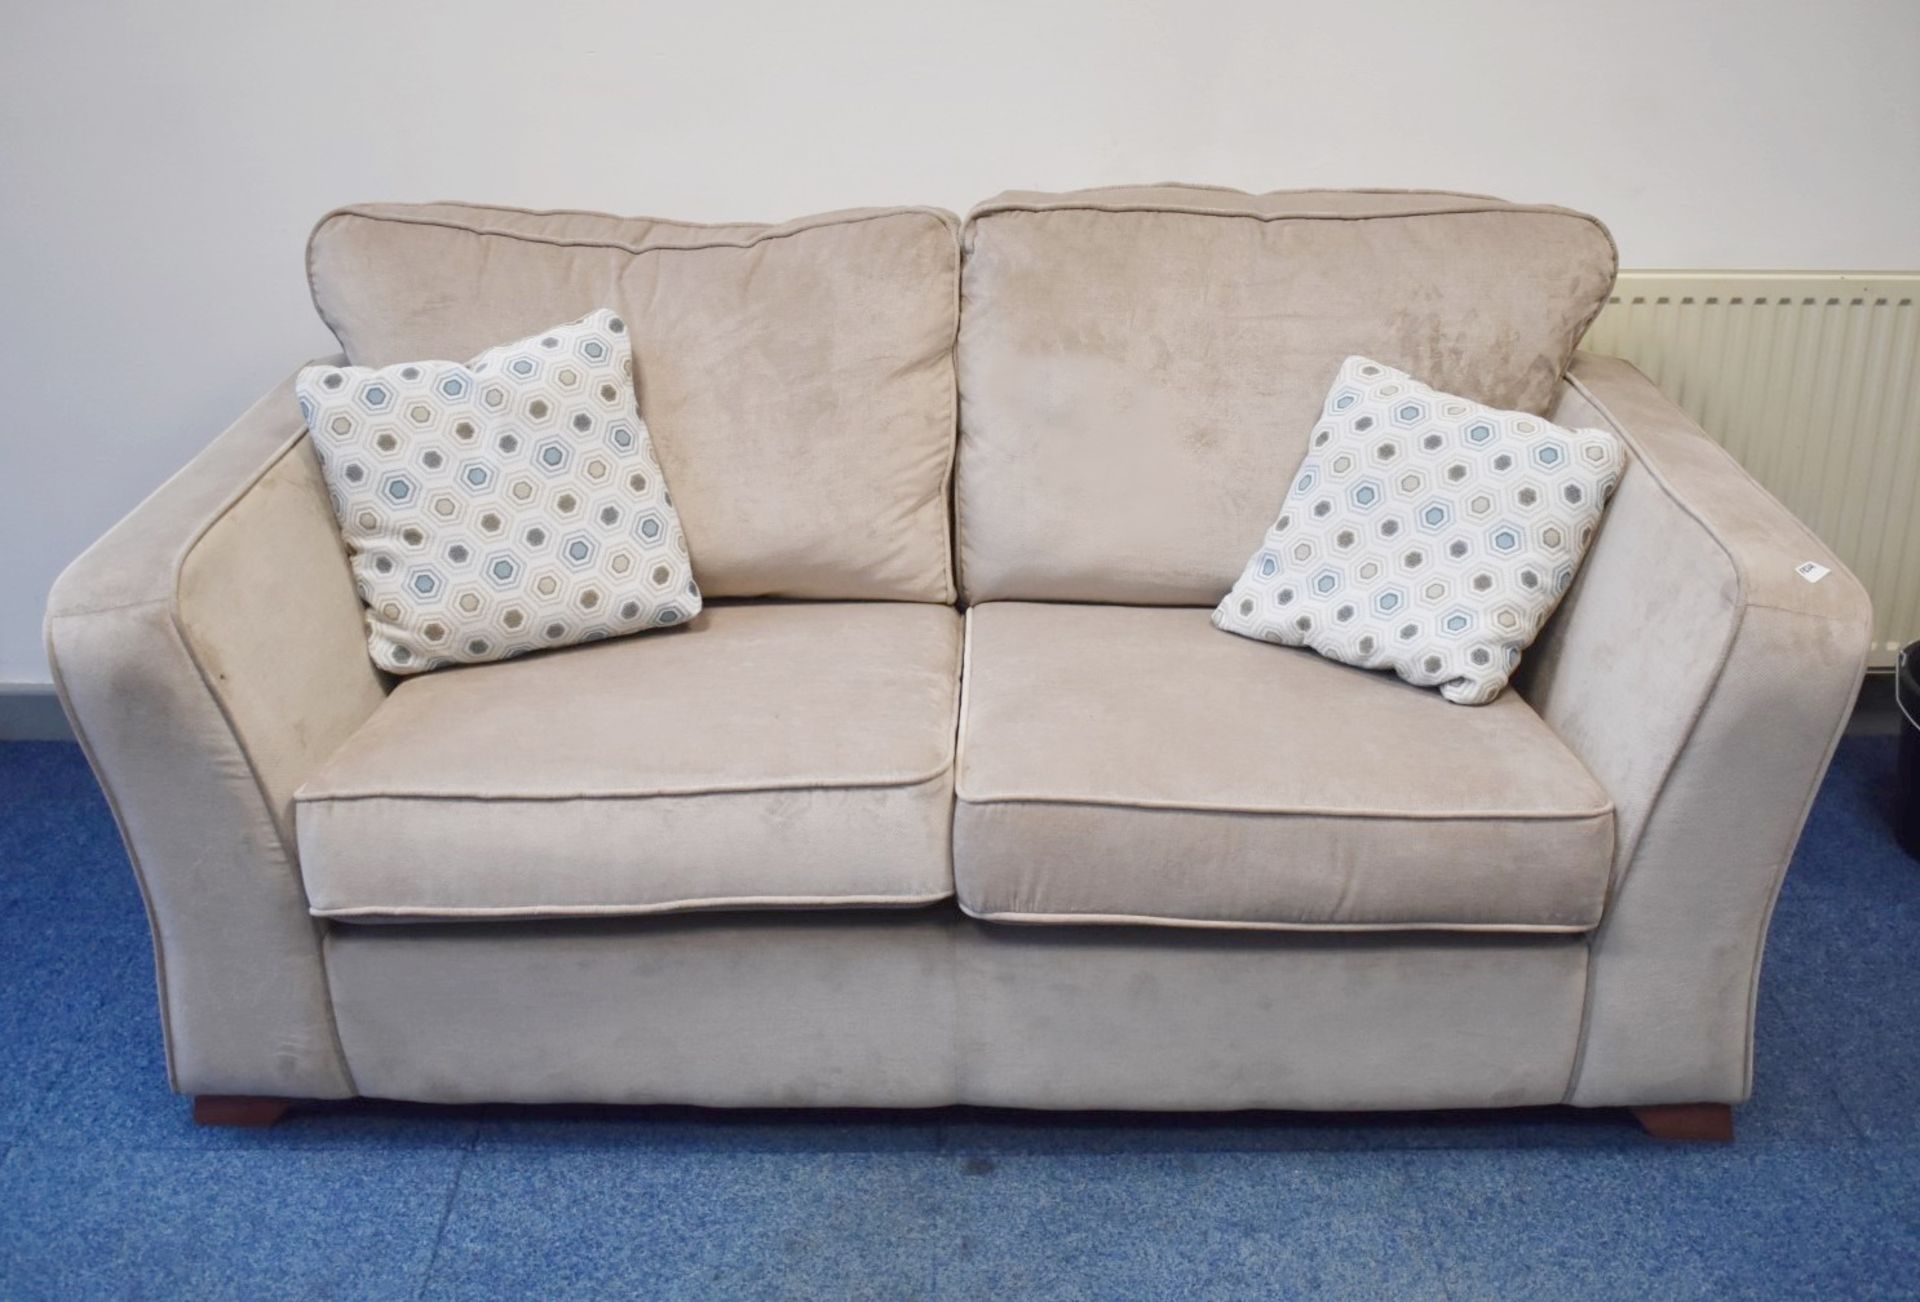 1 x Comfortable Sofa in Light Fabric With Scatter Pillows - 180cm Width - Very Good Condition -